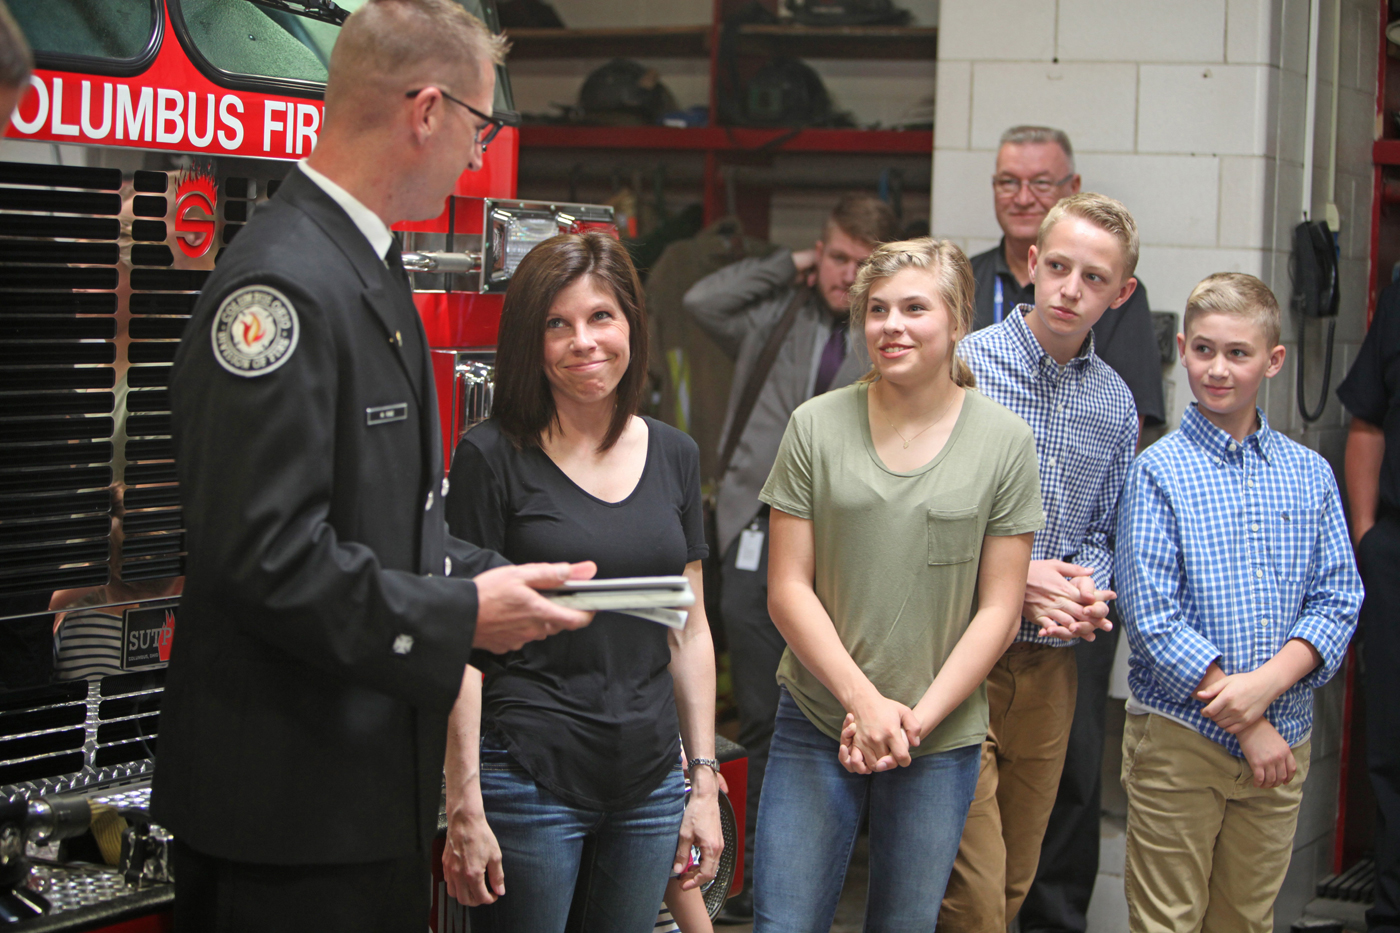 Mark Rine looks at his family after a proclamation was read in his honor as he was named Firefighter of the Month.